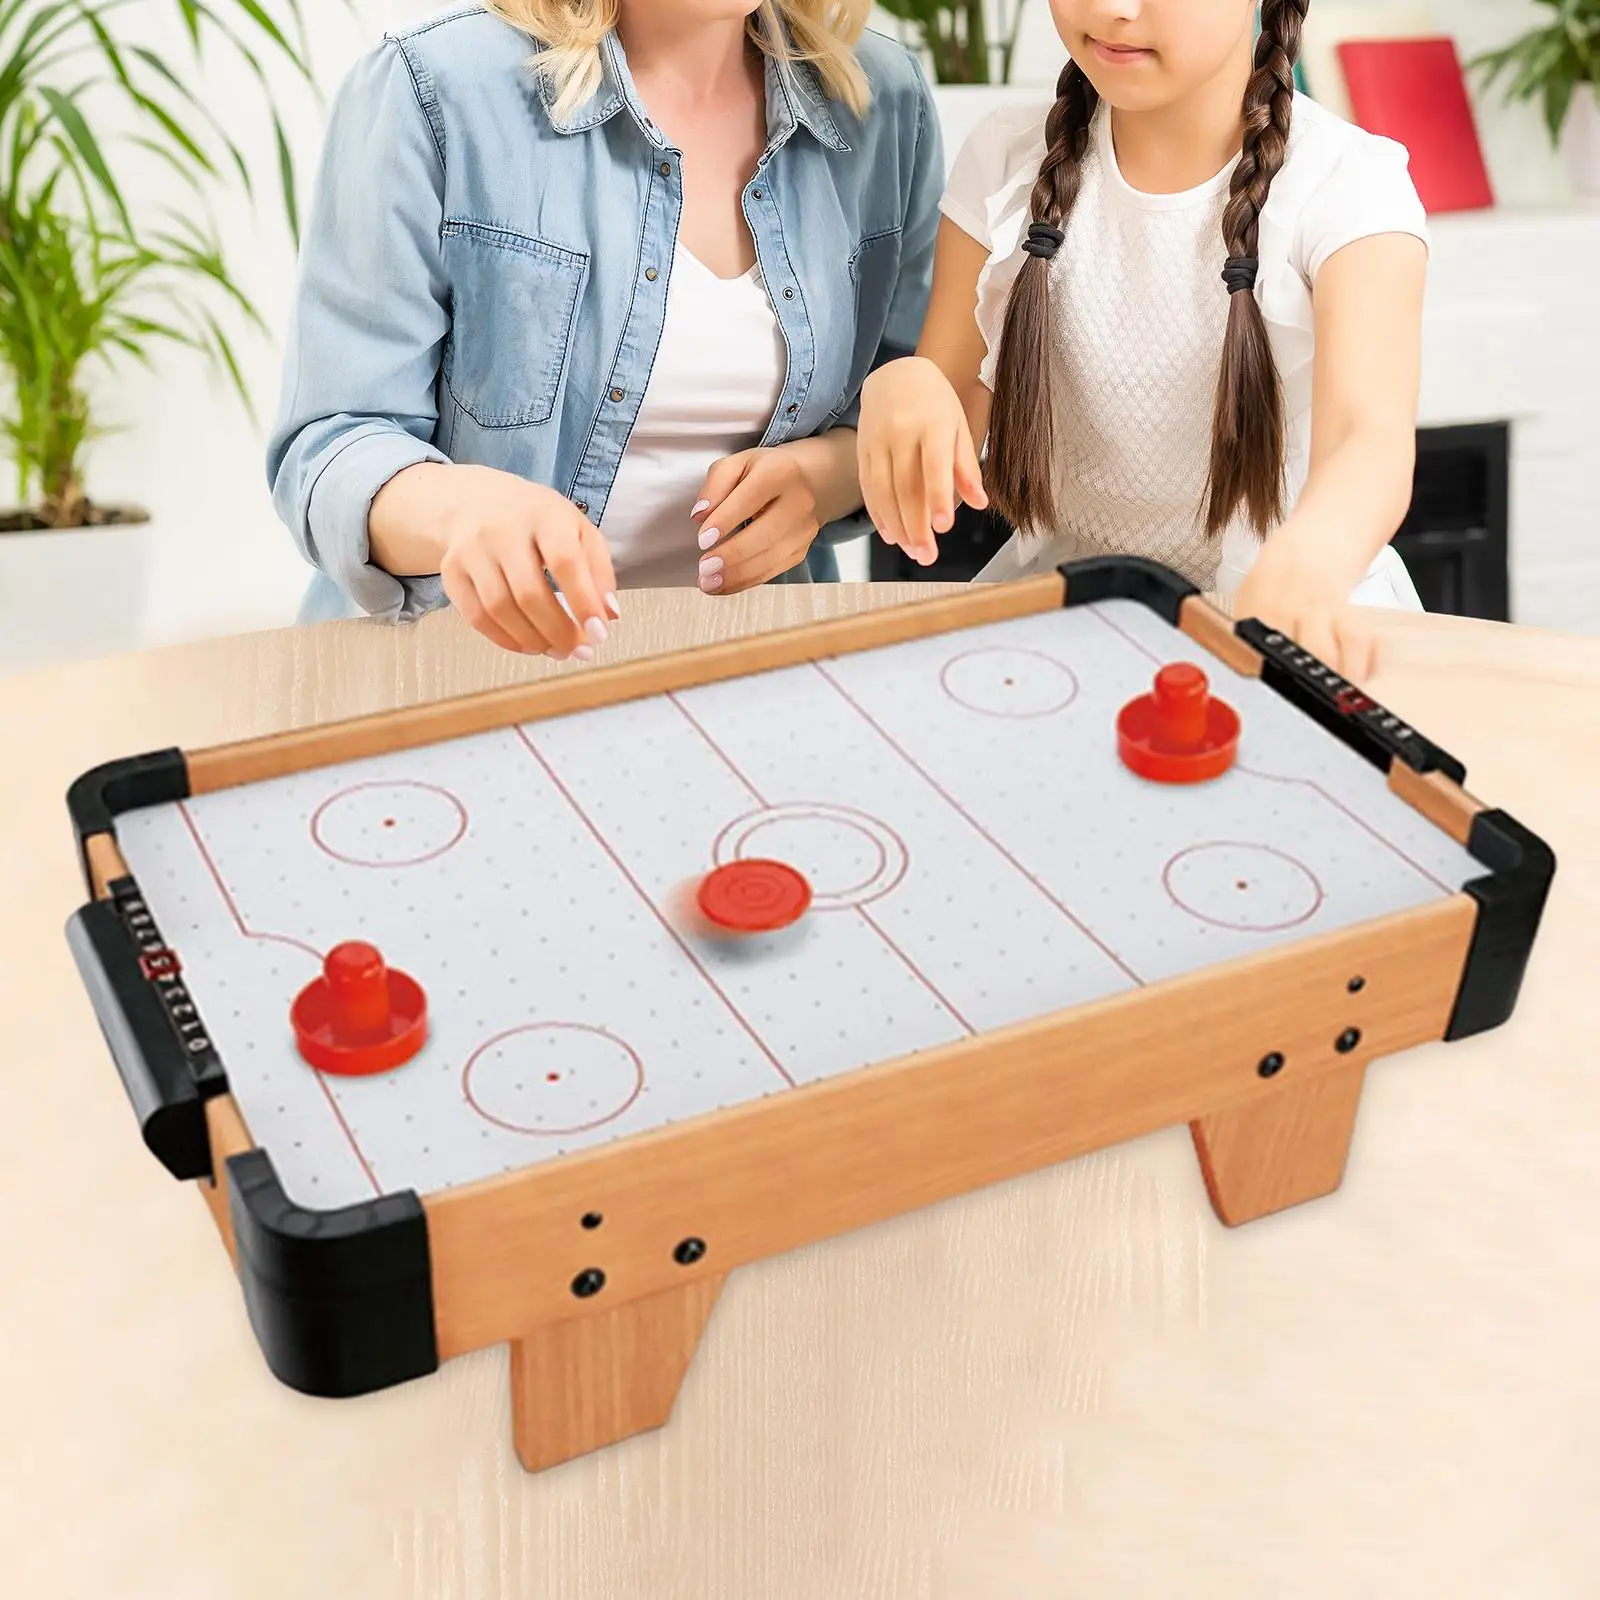 Air Hockey Table Battle Game Desktop Playing Field Parent Child Interactive Family Game for Children Toddler Girls Boys Kids